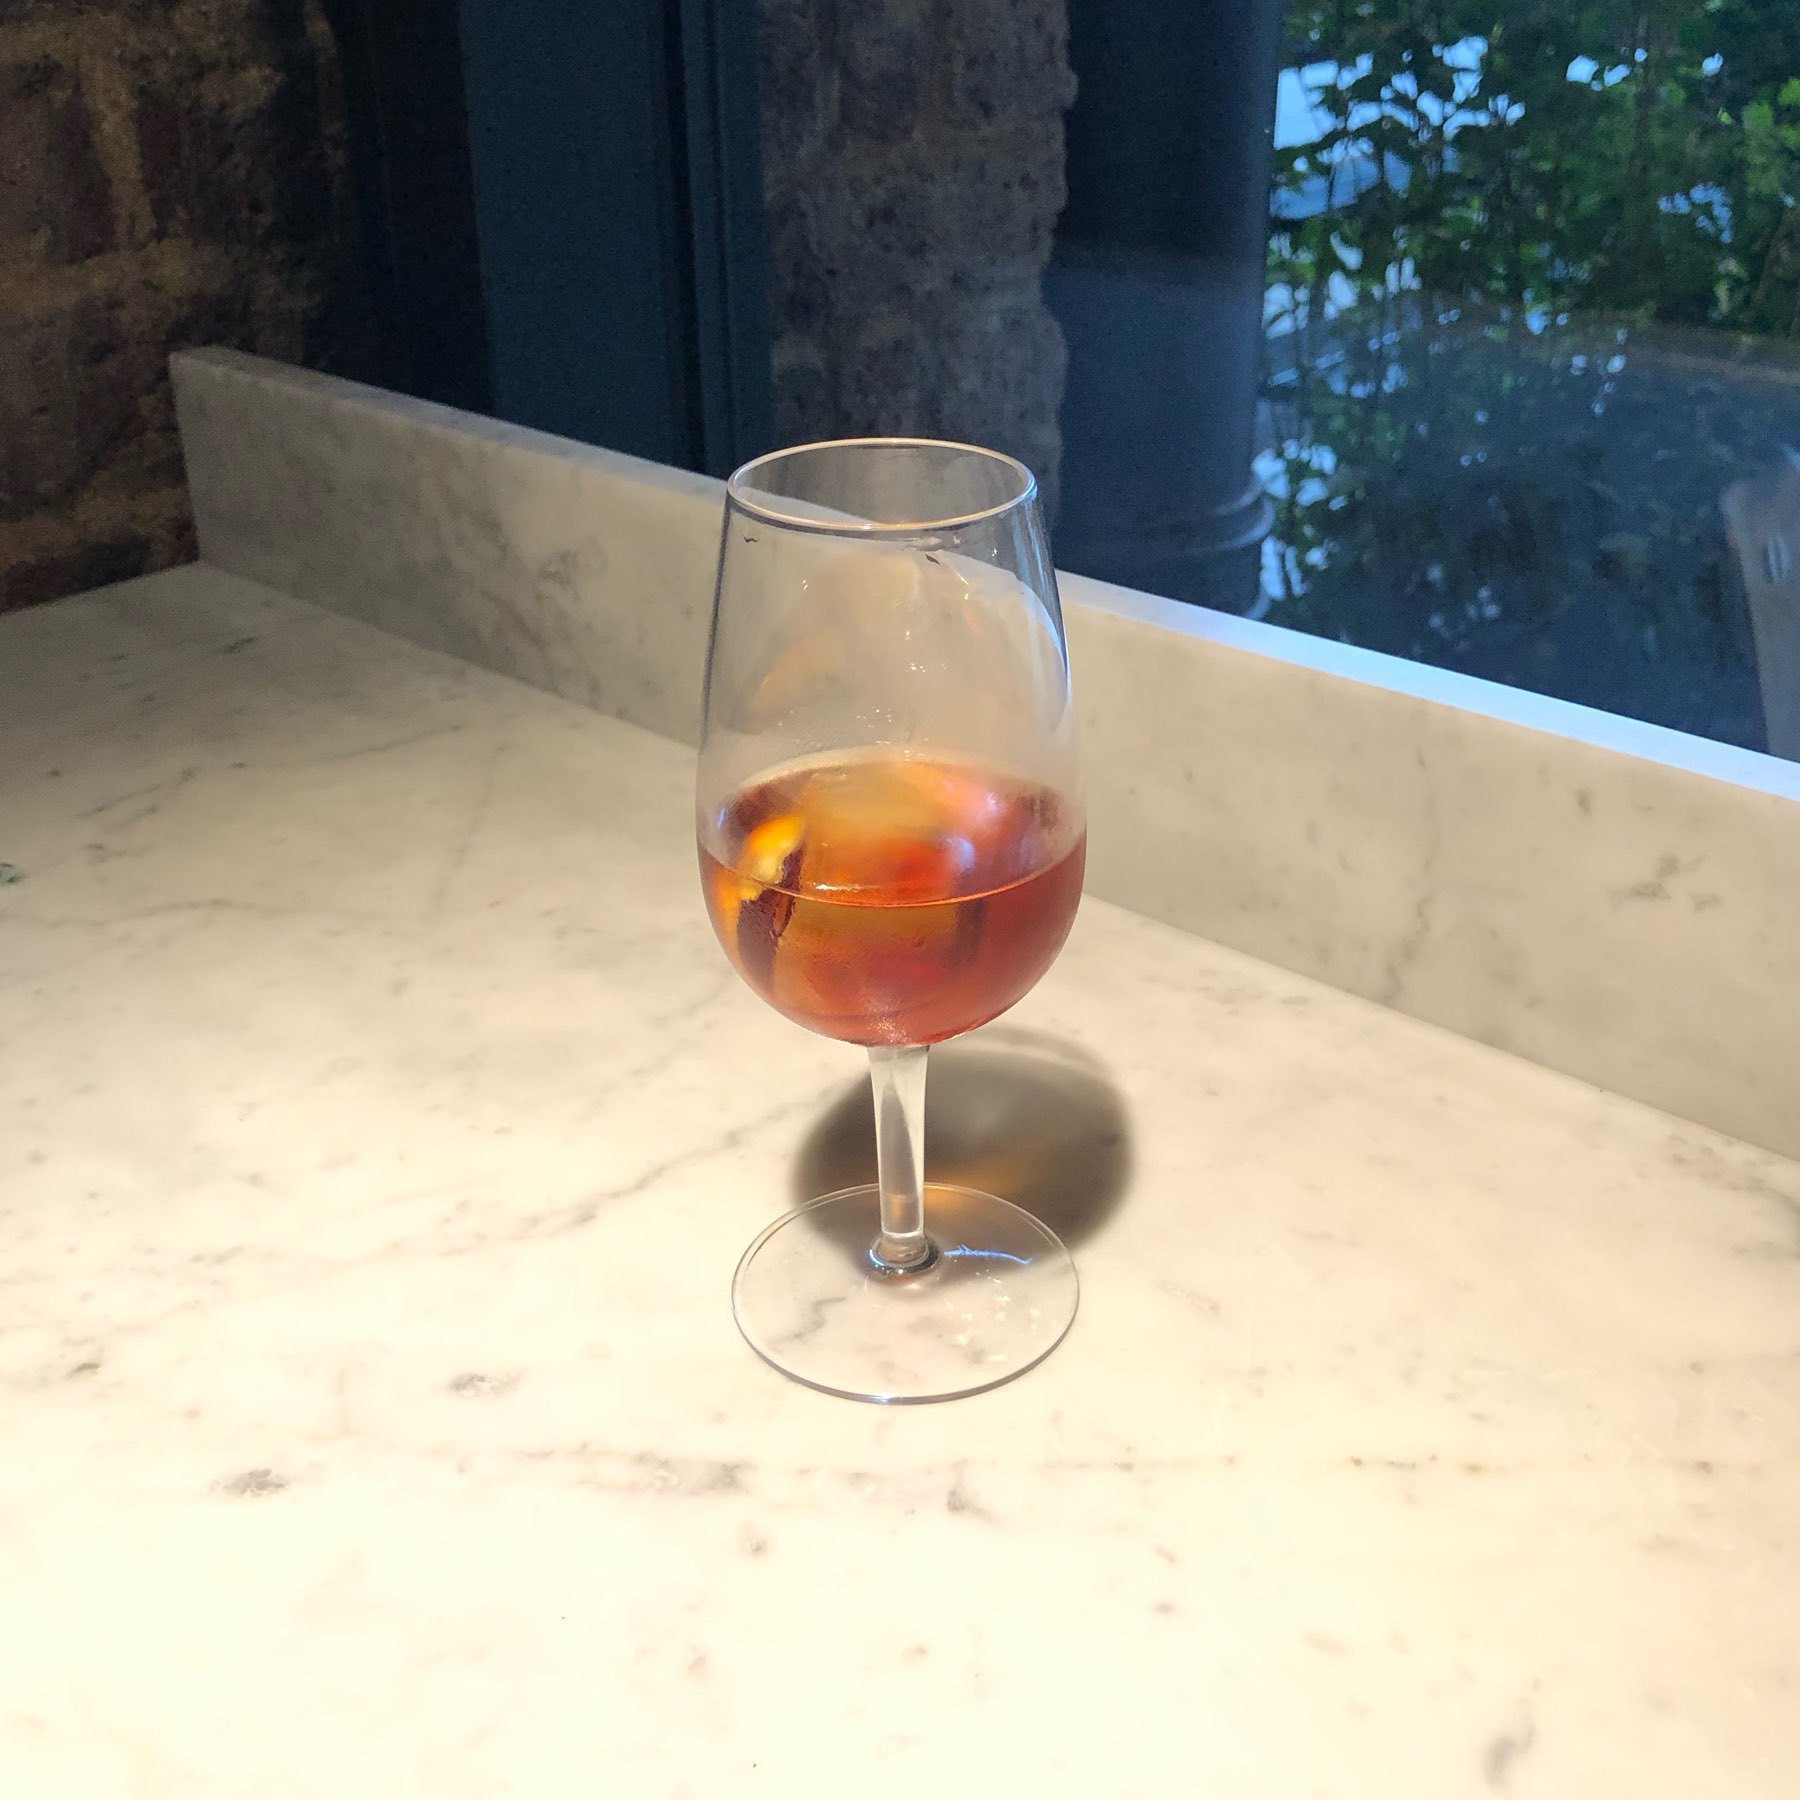 Vermut rosso in a short glass